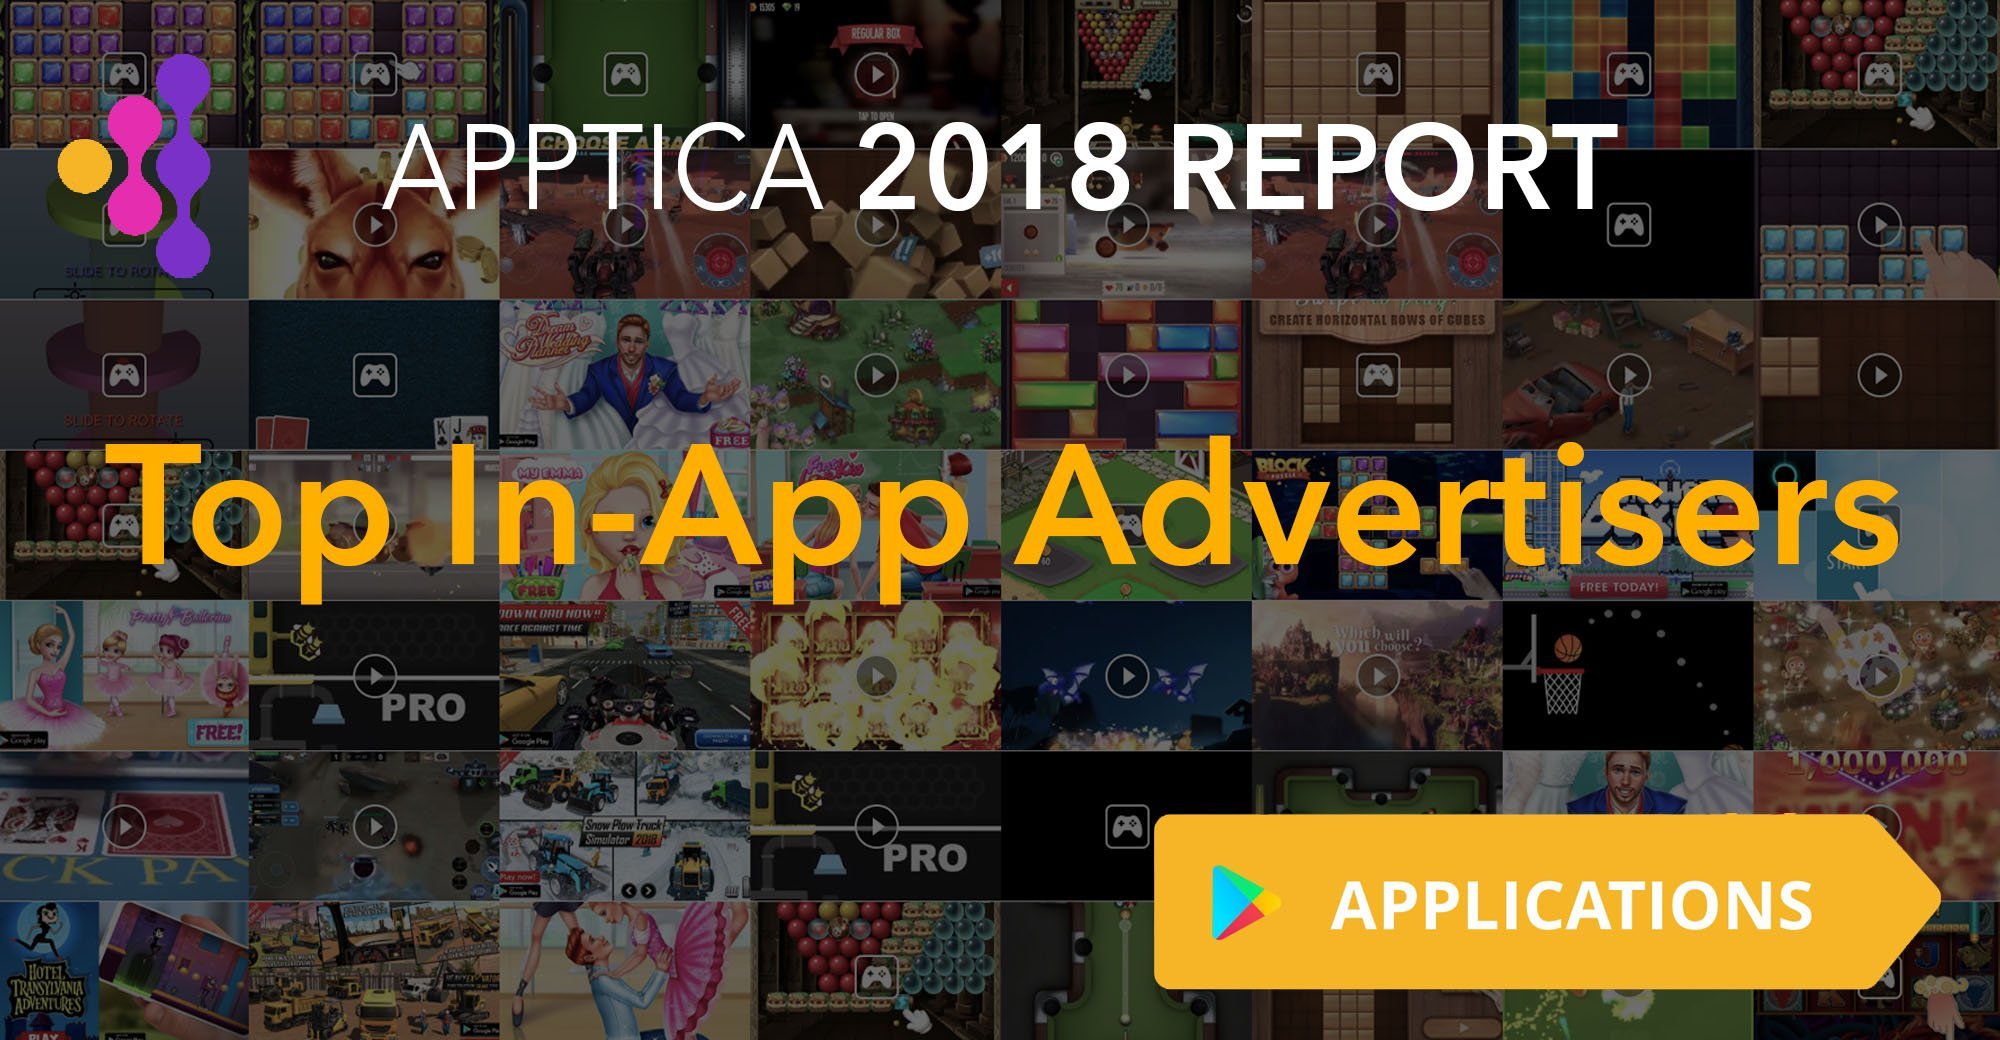 Top In-App Advertisers of 2018, Android, Application Category. Apptica Overview.